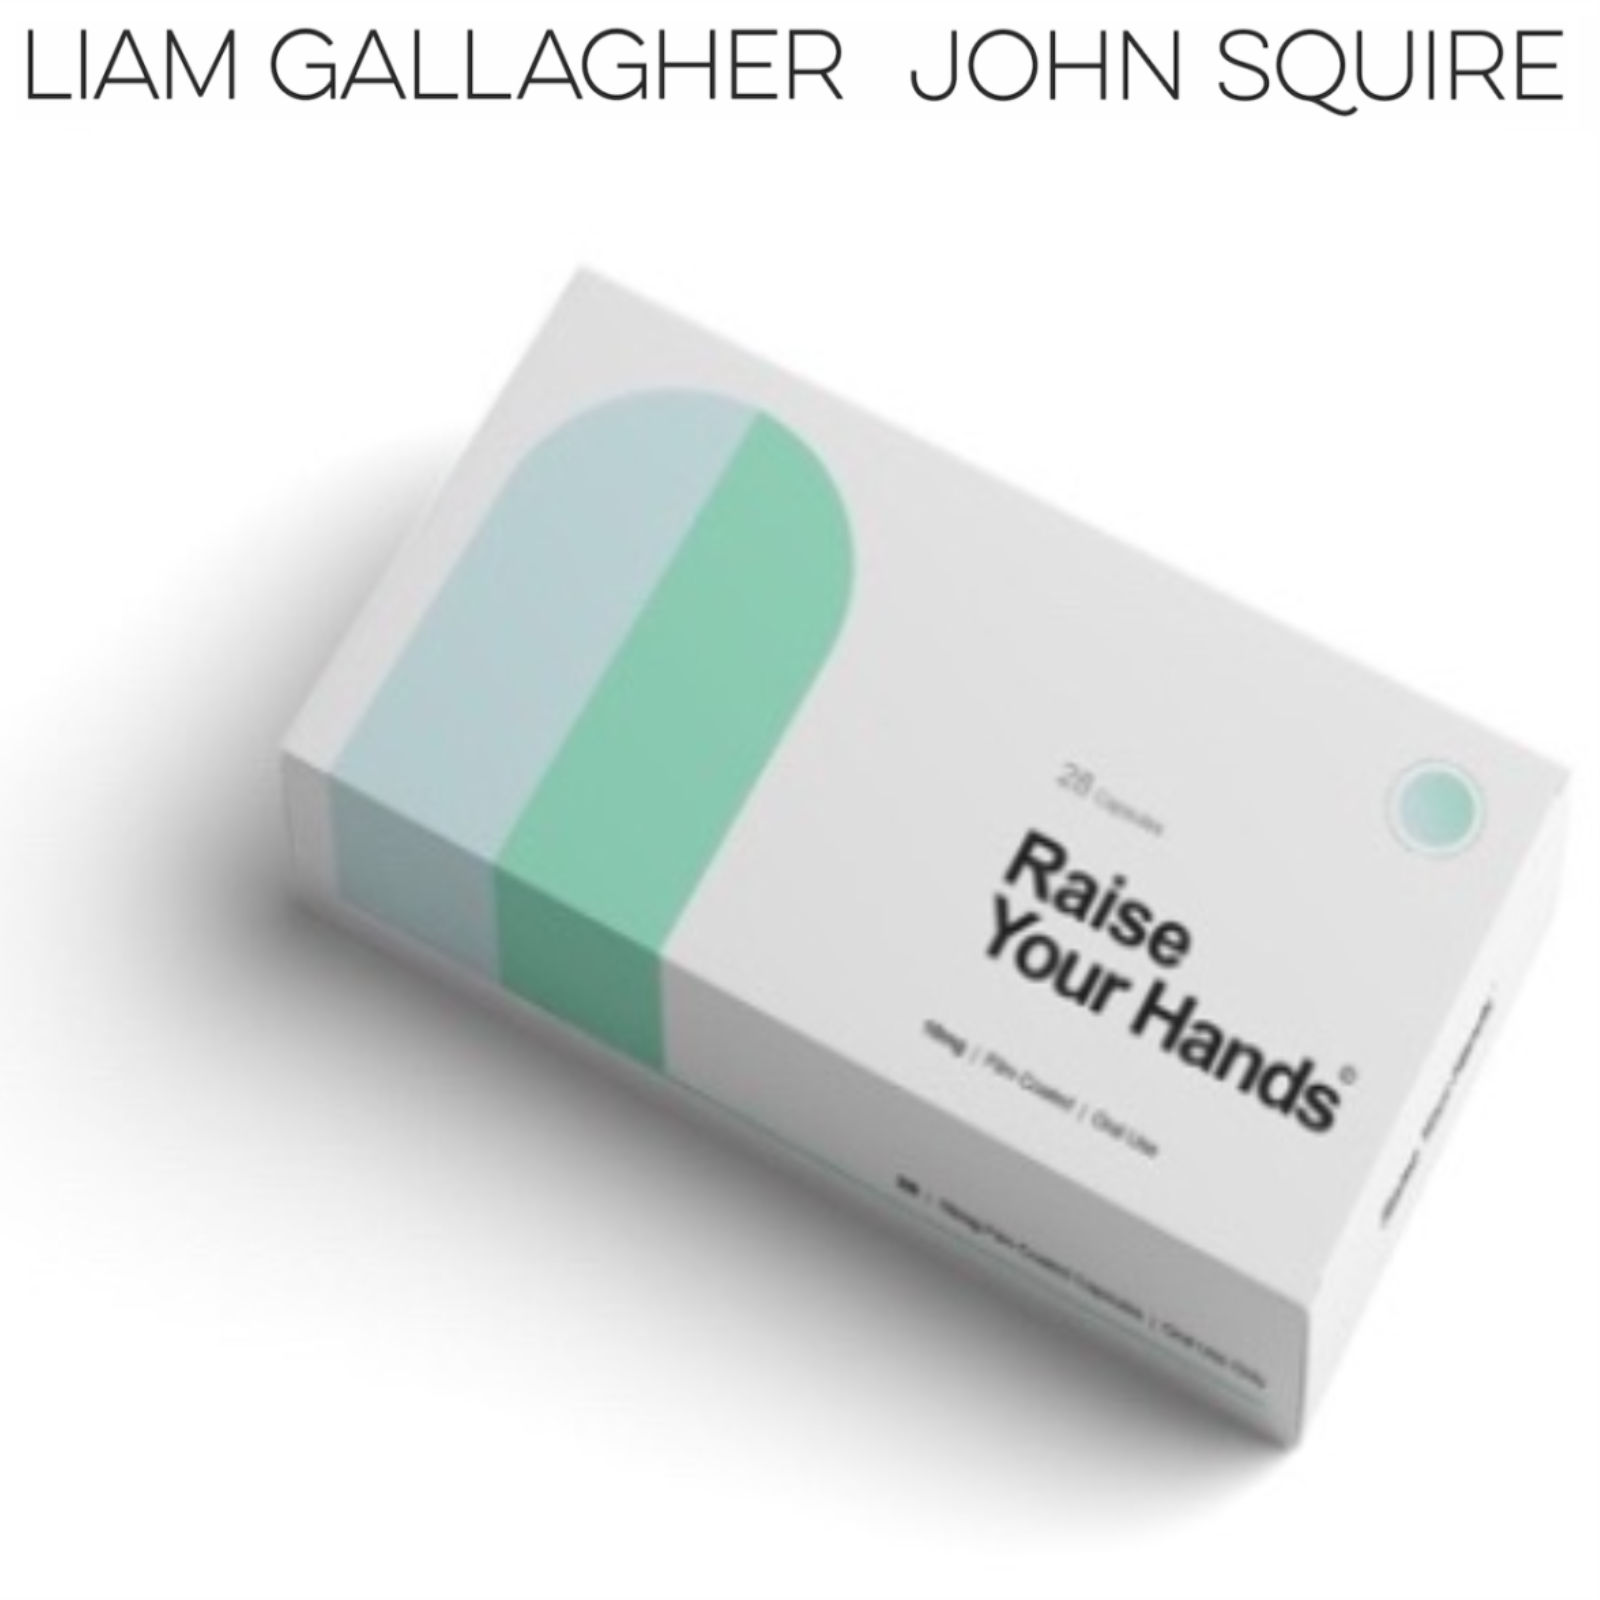 Liam Gallagher & John Squire Raise Your Hands cover artwork